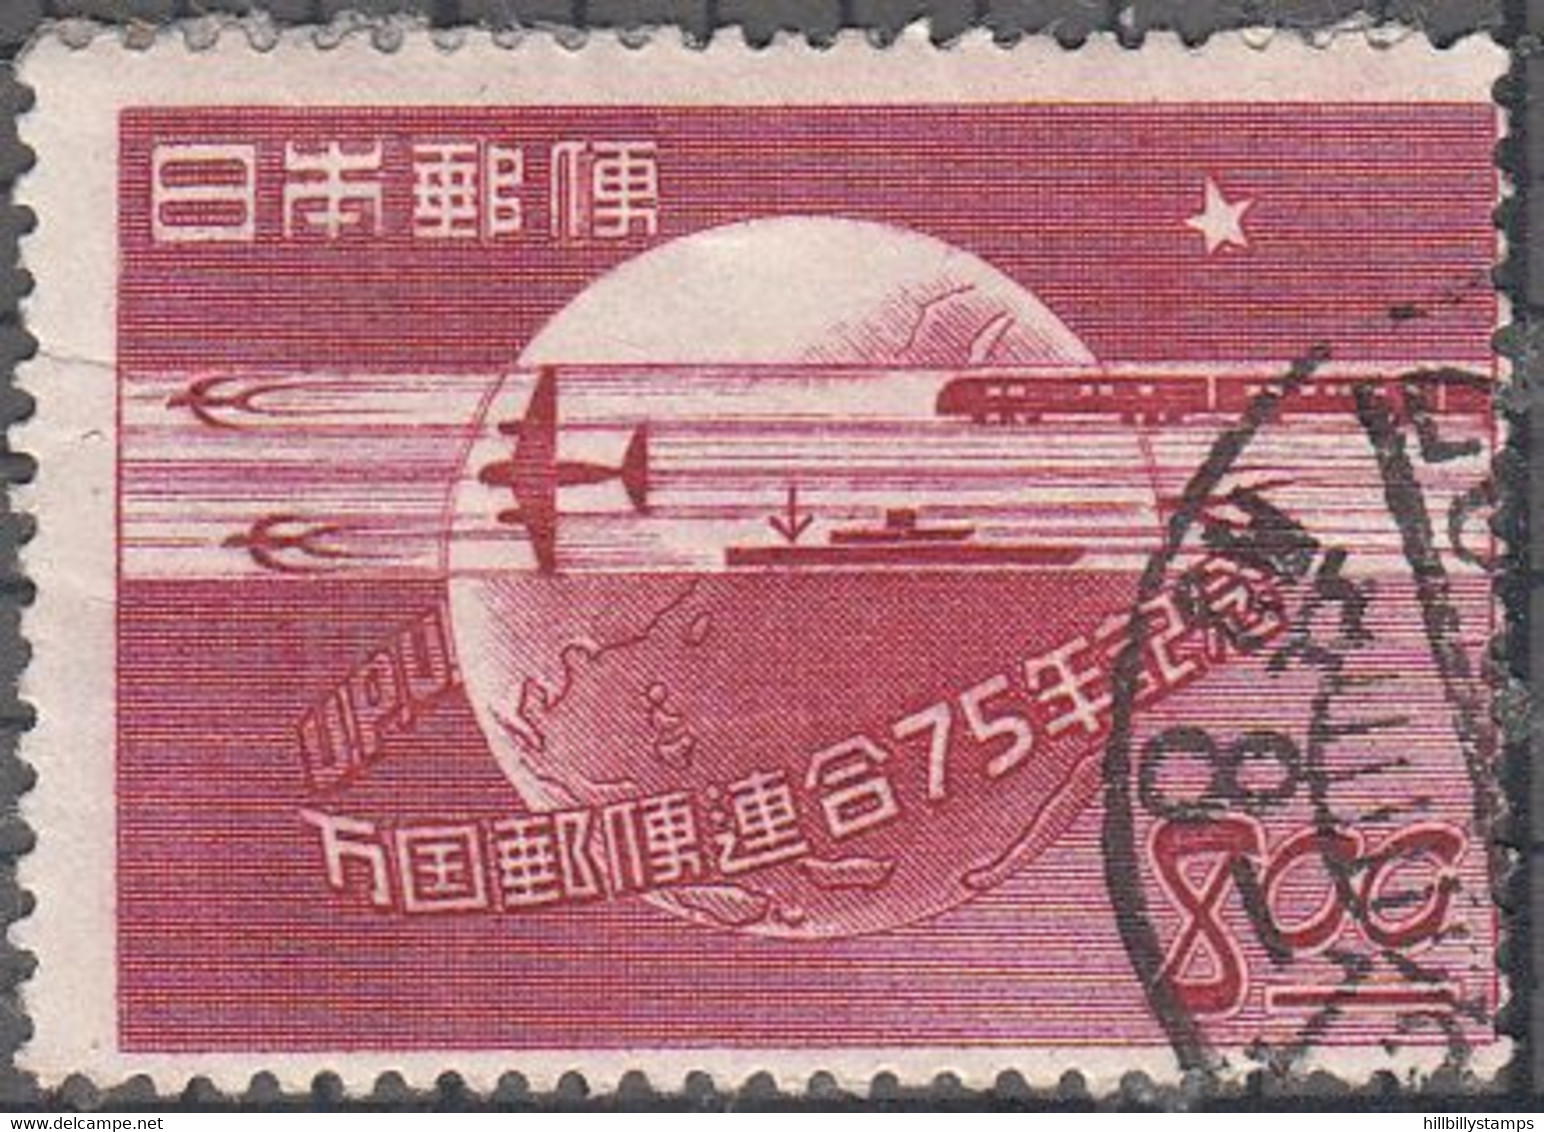 JAPAN   SCOTT NO 475  USED  YEAR  1949 - Used Stamps